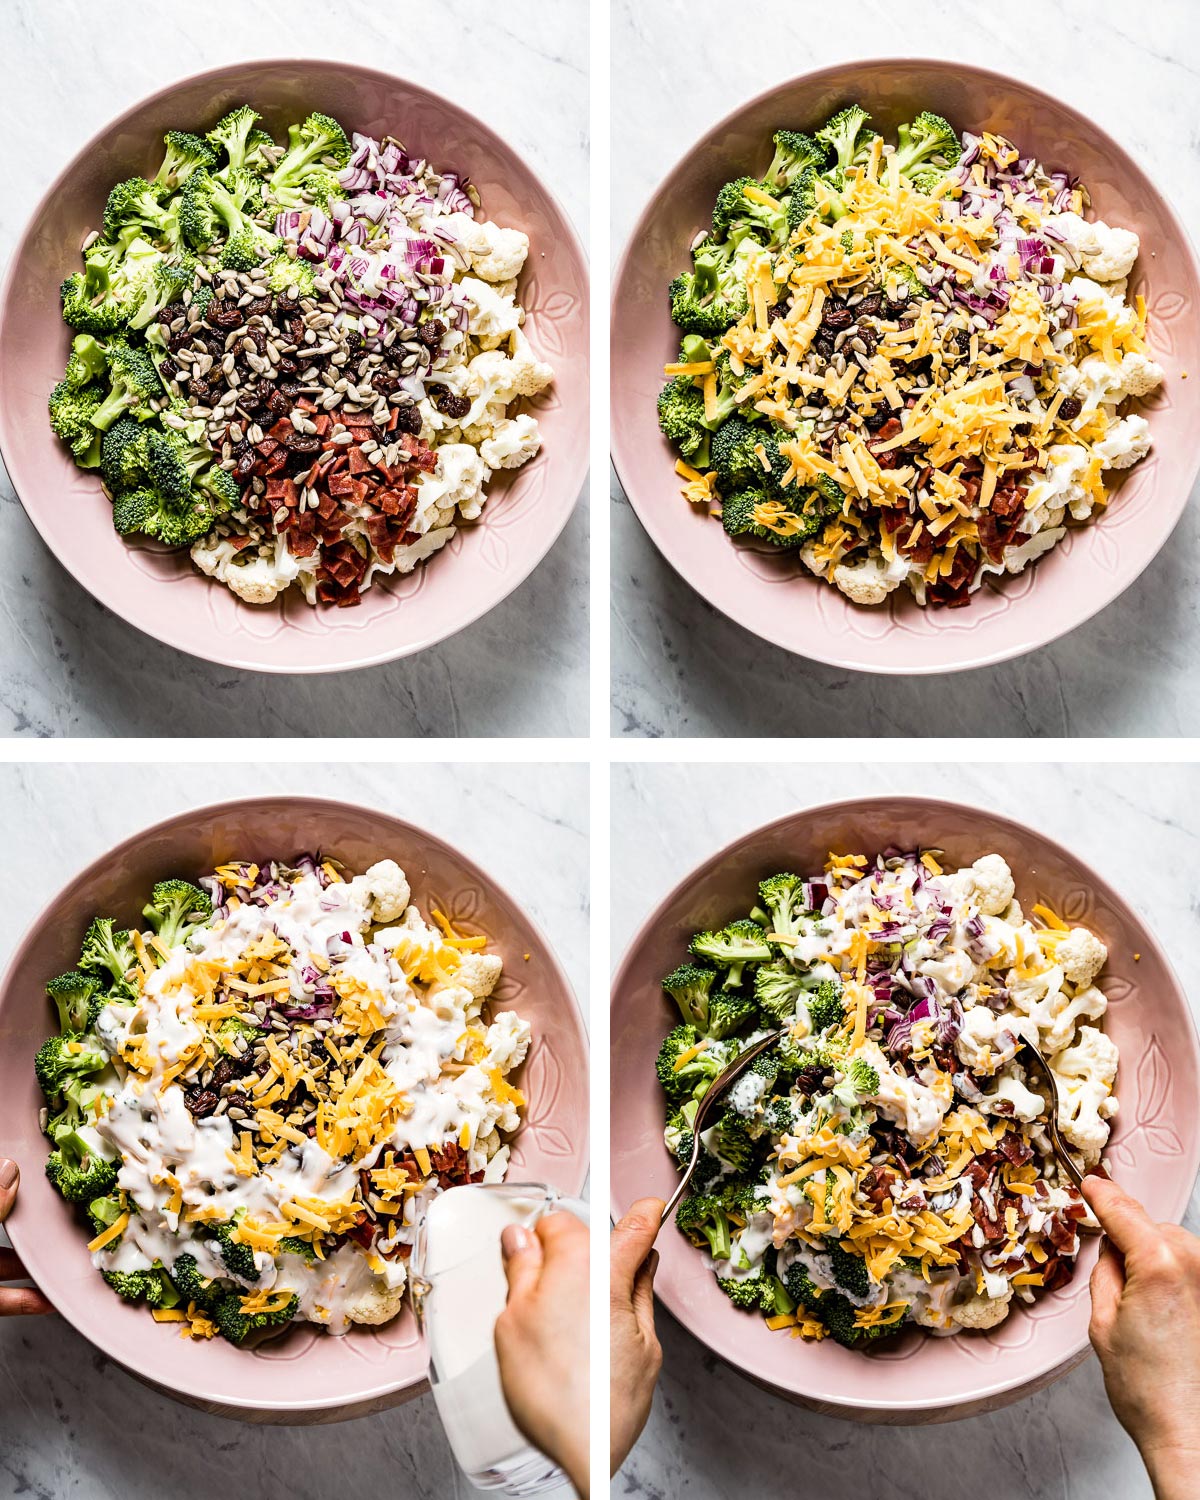 A person is assembling the salad in a large mixing bowl from the top view in a collage of images.